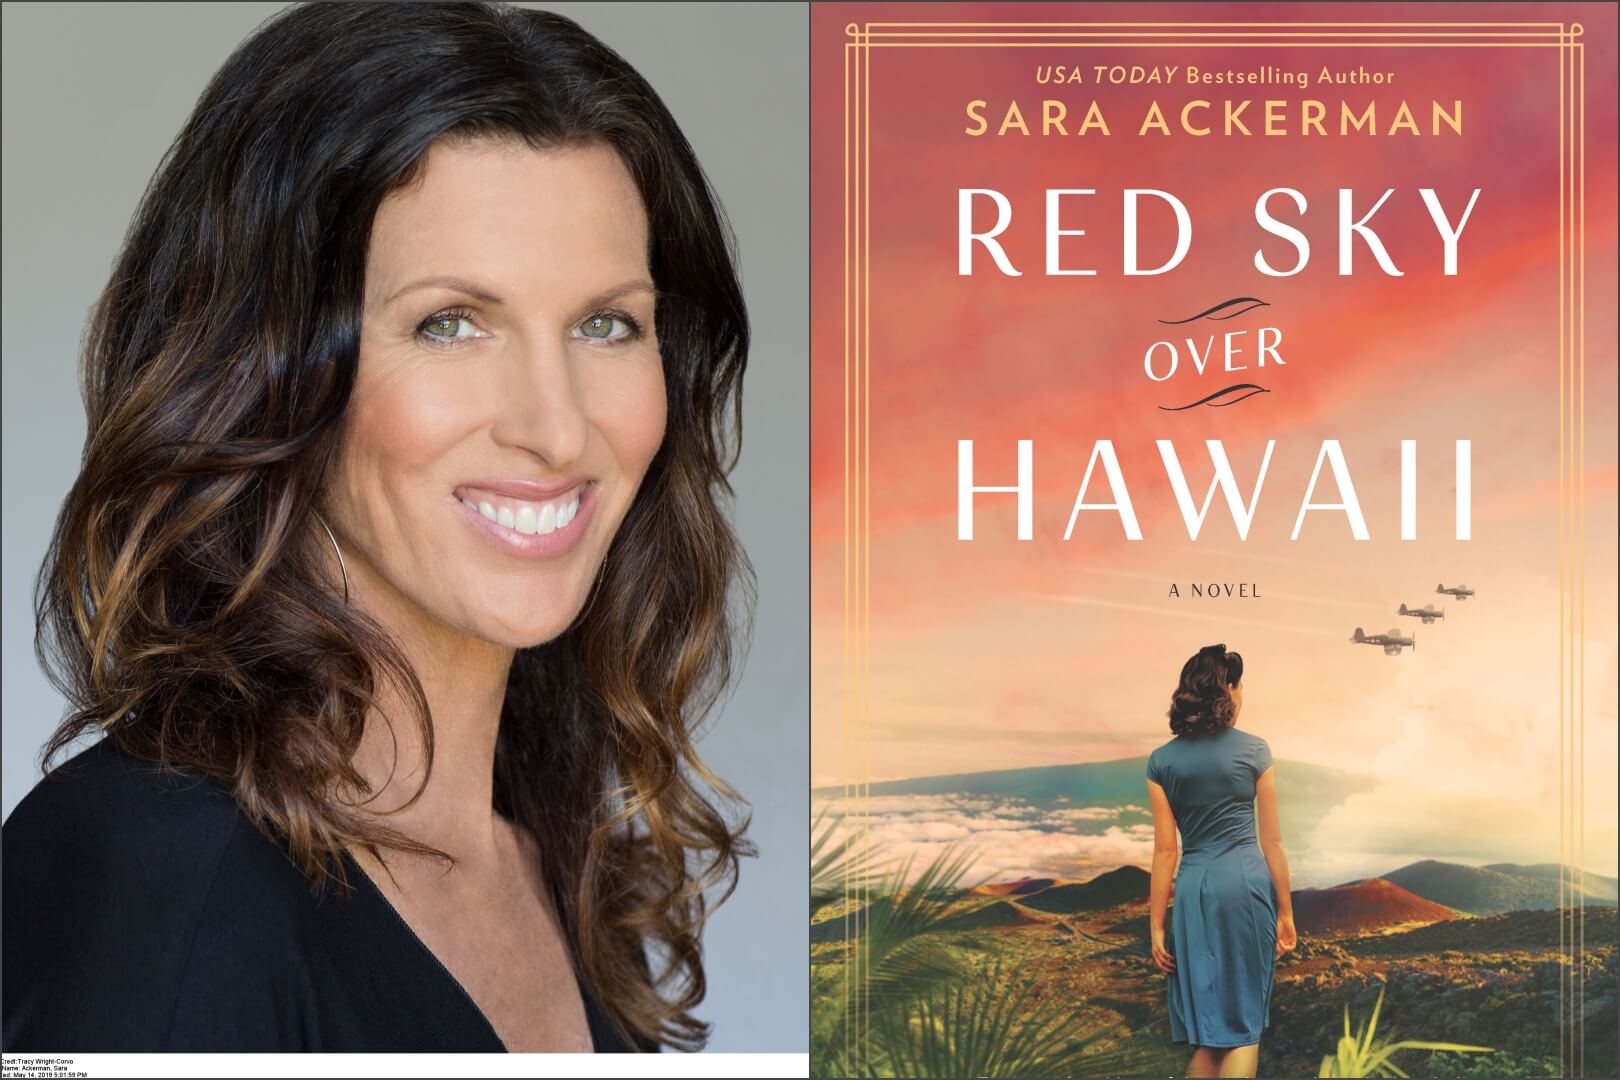 Q&A with Sara Ackerman, Author of Red Sky Over Hawaii